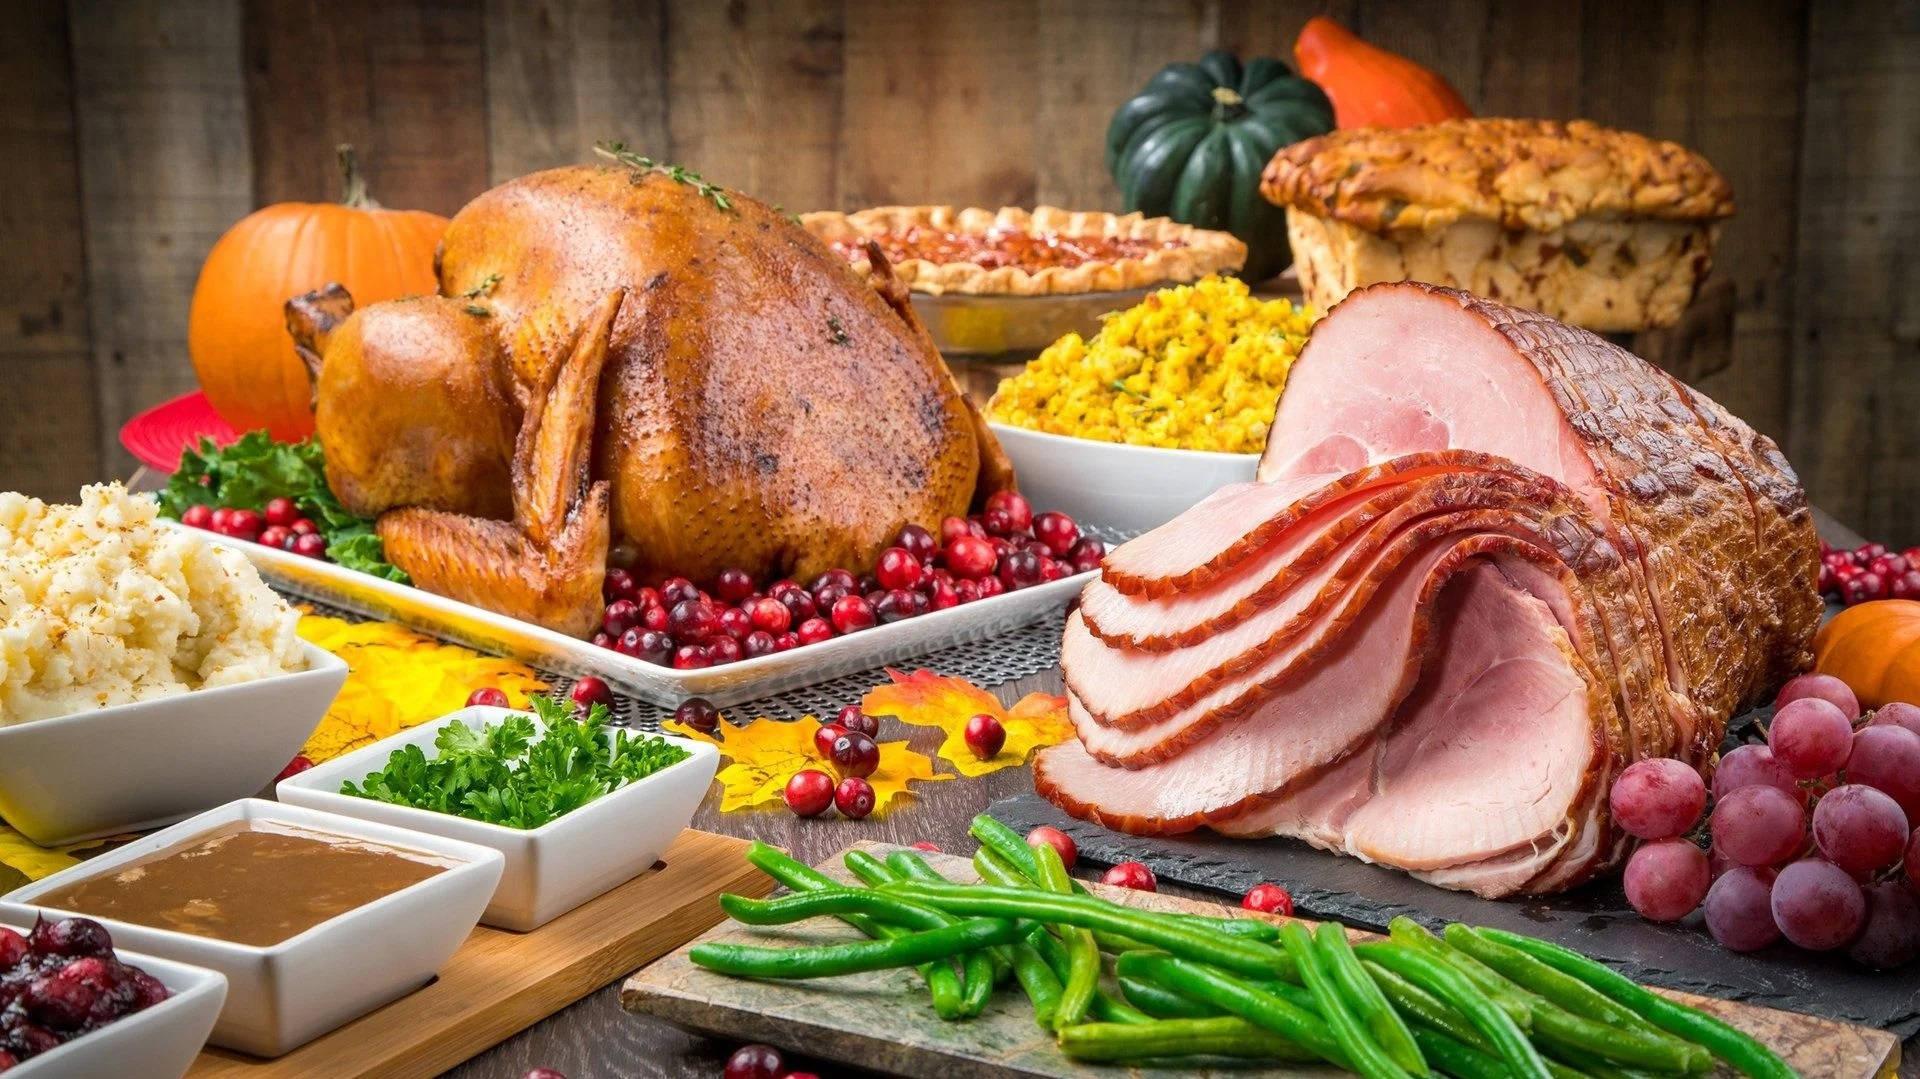 A Sumptuous Feast Of Ham And Roasted Turkey For Dinner